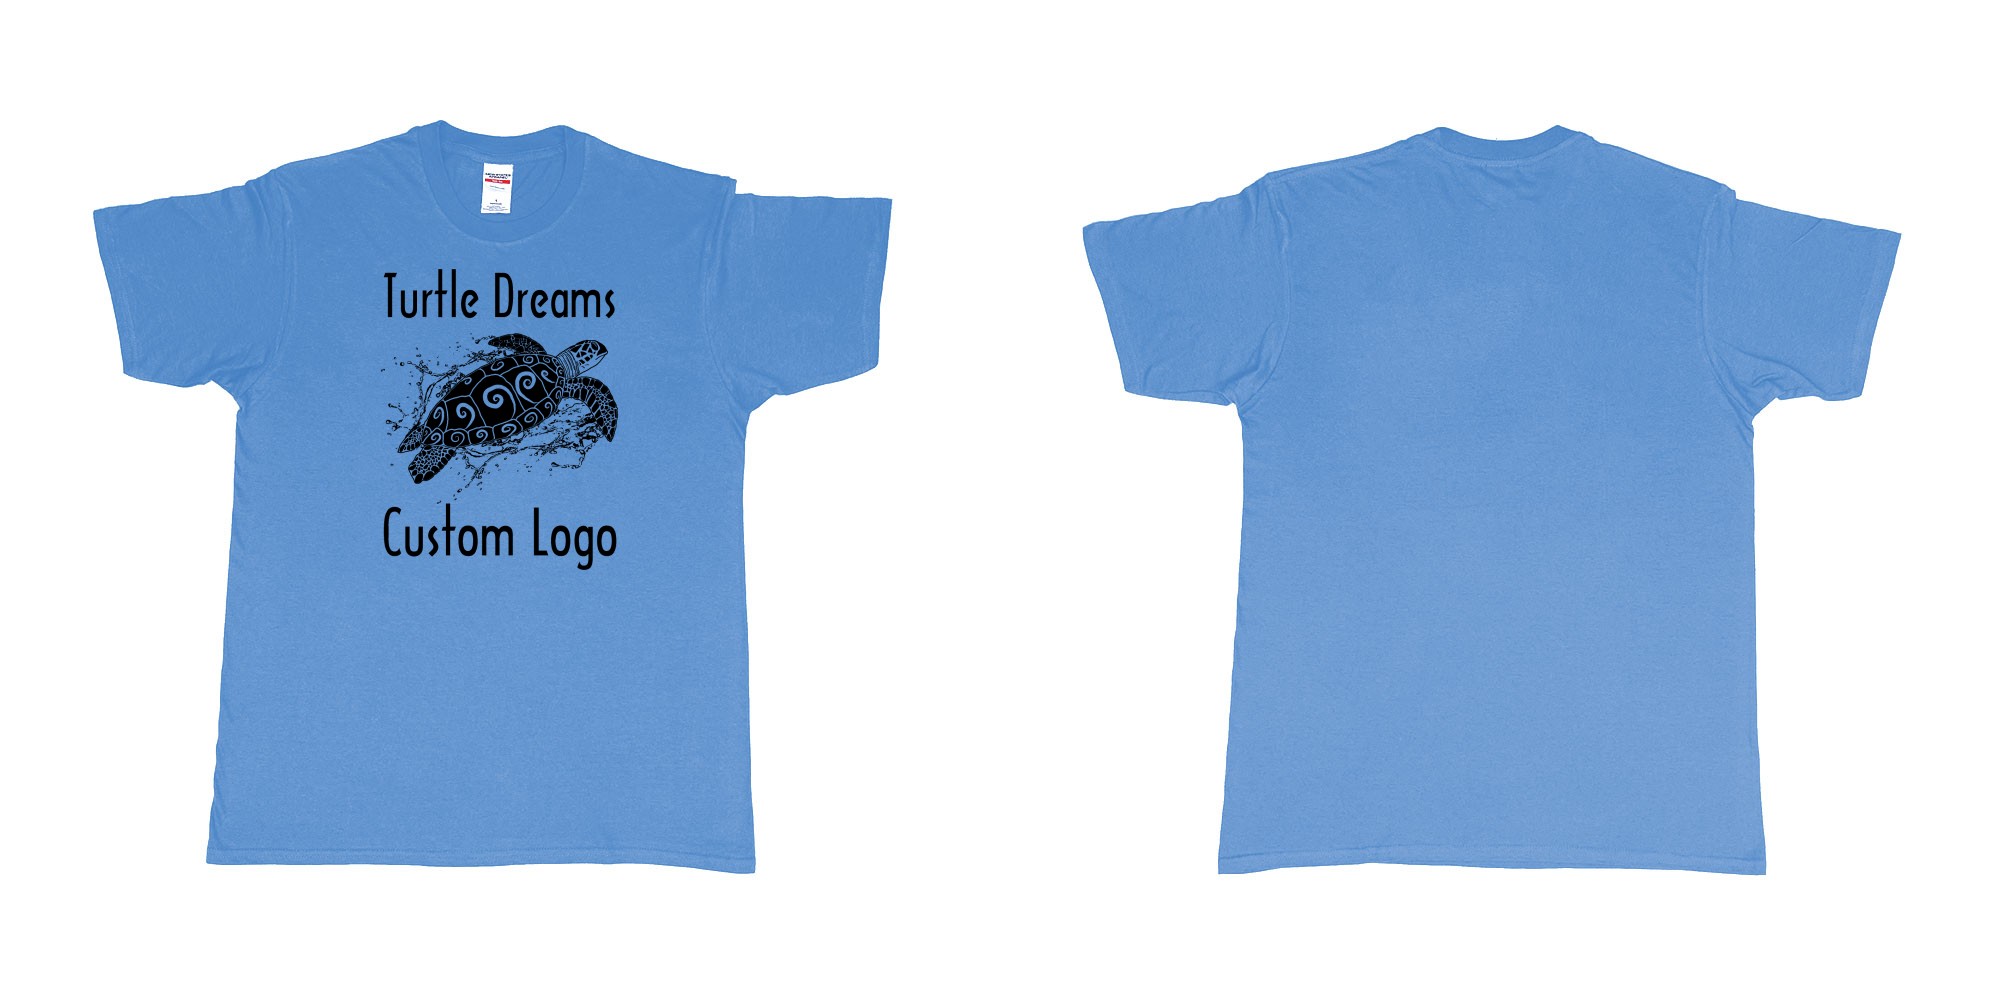 Custom tshirt design turtle dreams custom logo design in fabric color carolina-blue choice your own text made in Bali by The Pirate Way